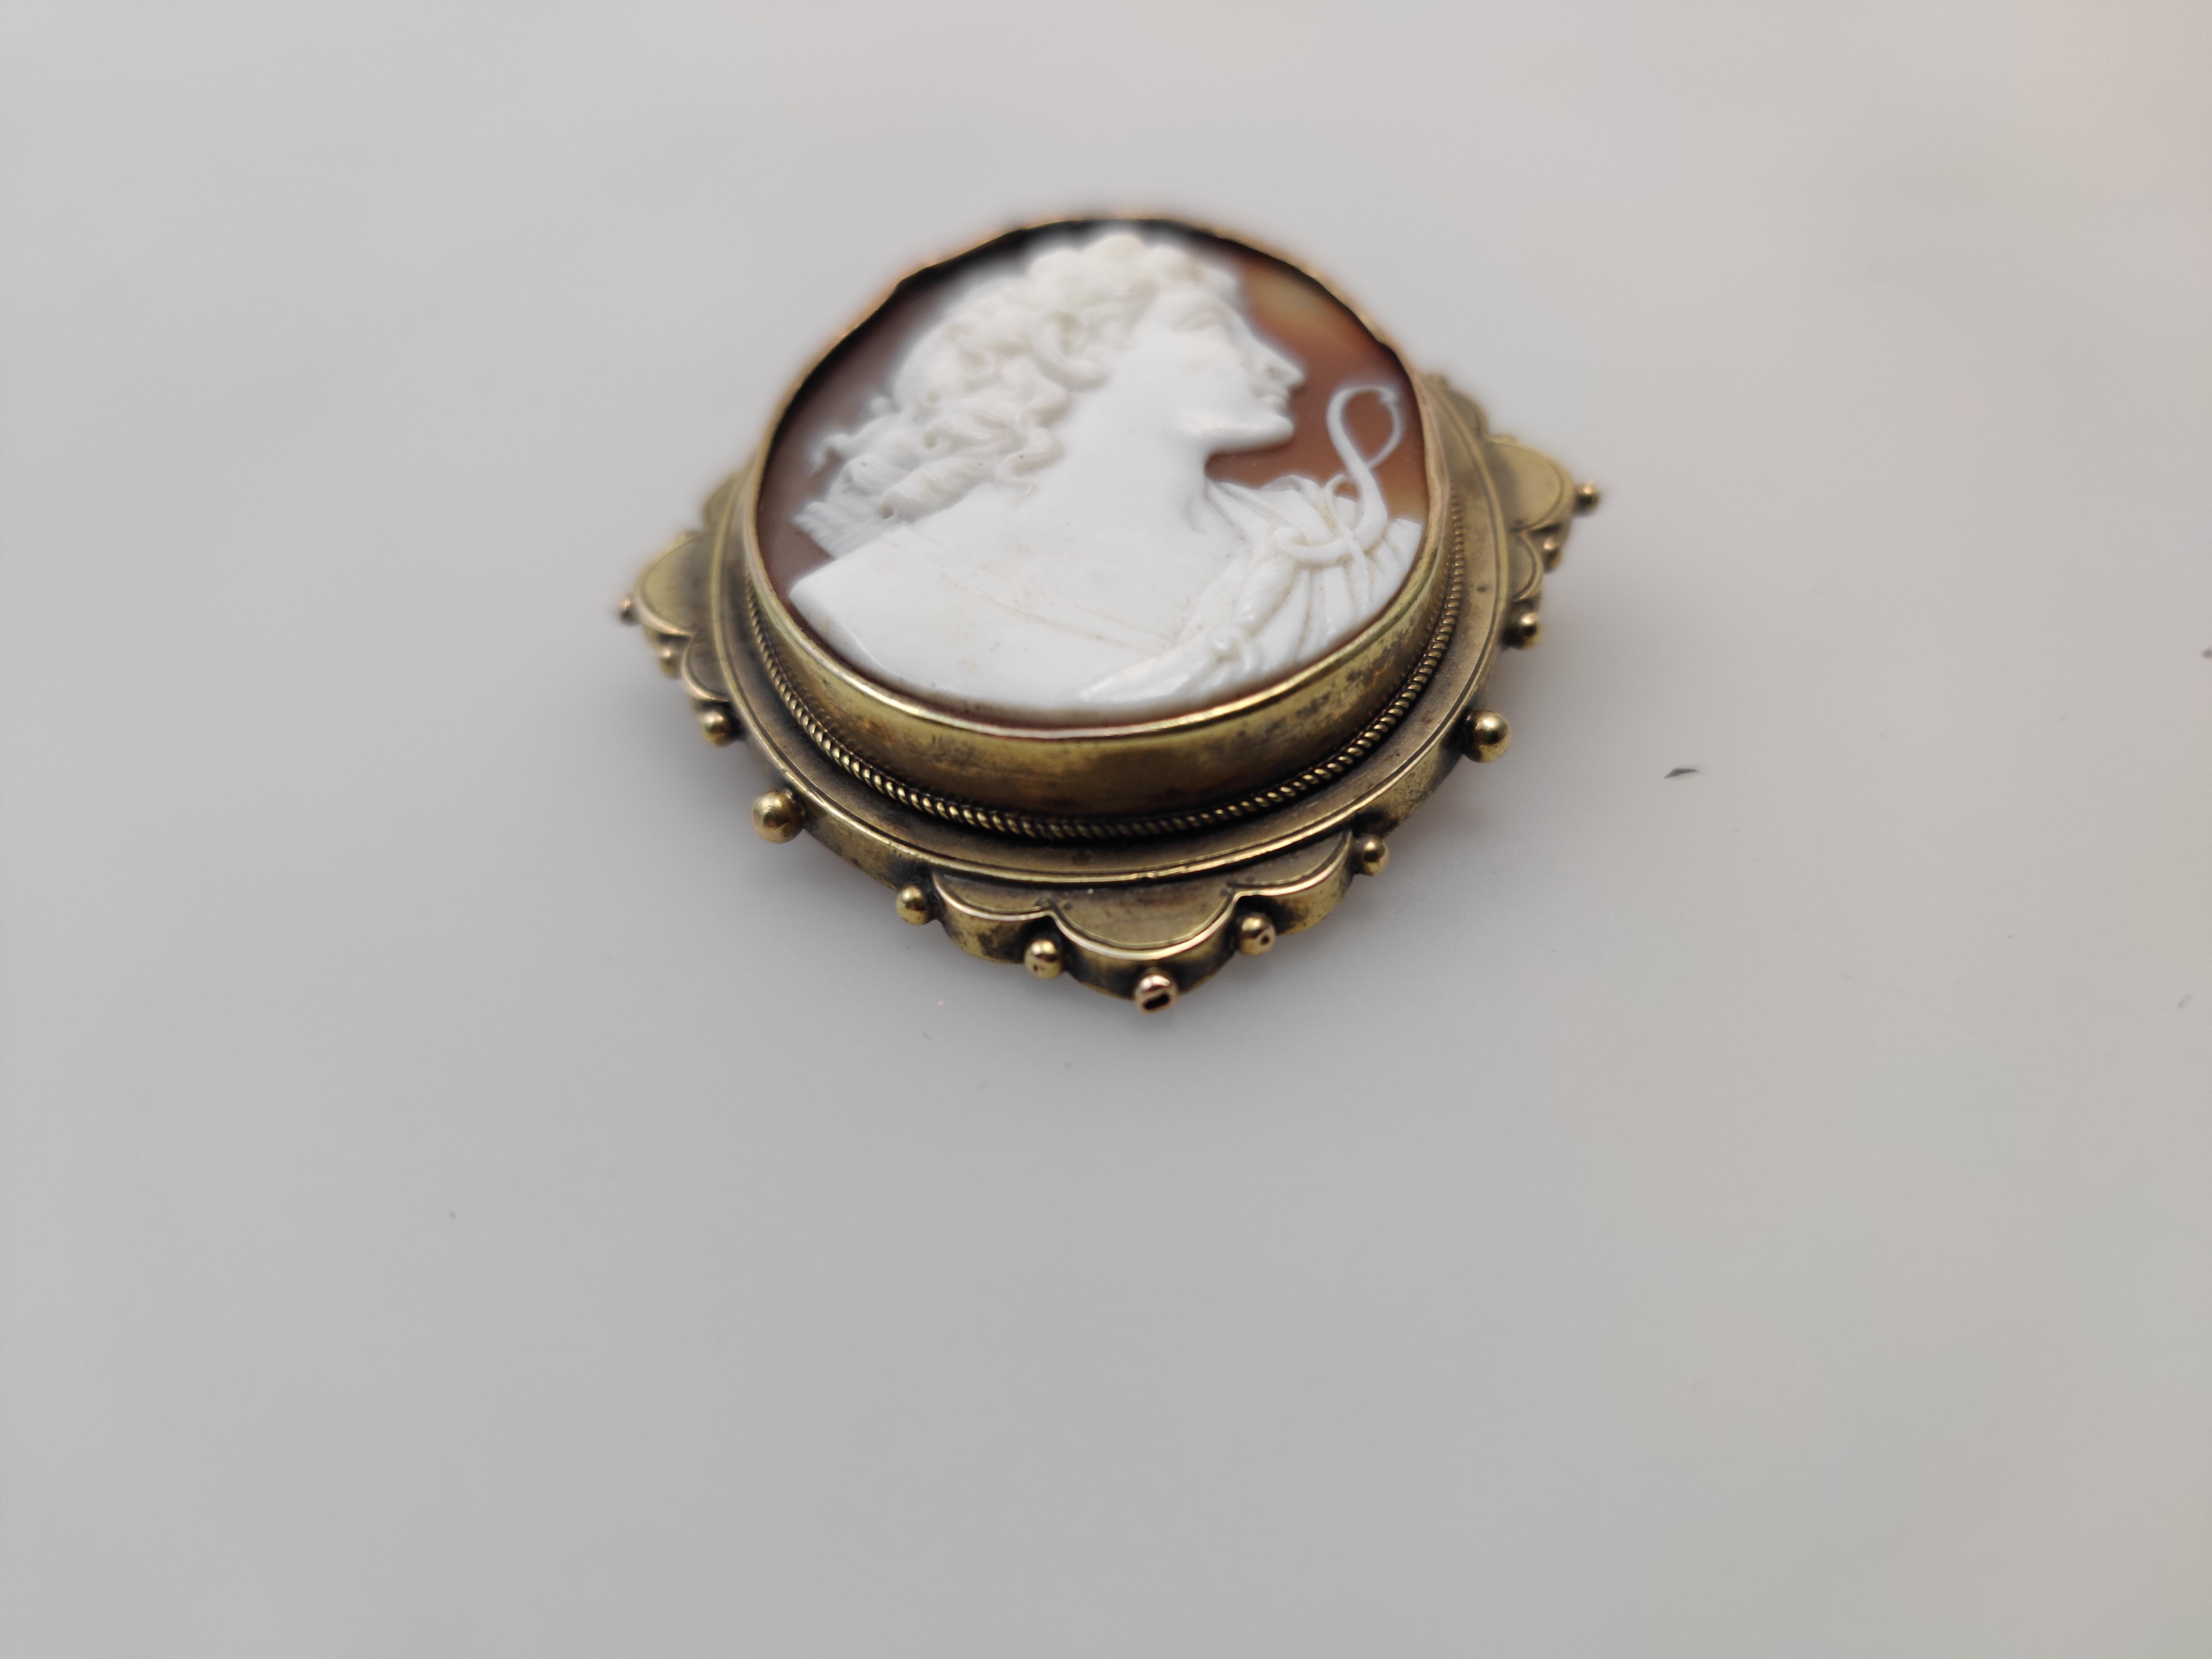 14 k yellow gold
shell cameo
19. century Germany
13 gram
size 50 x 42 mm

